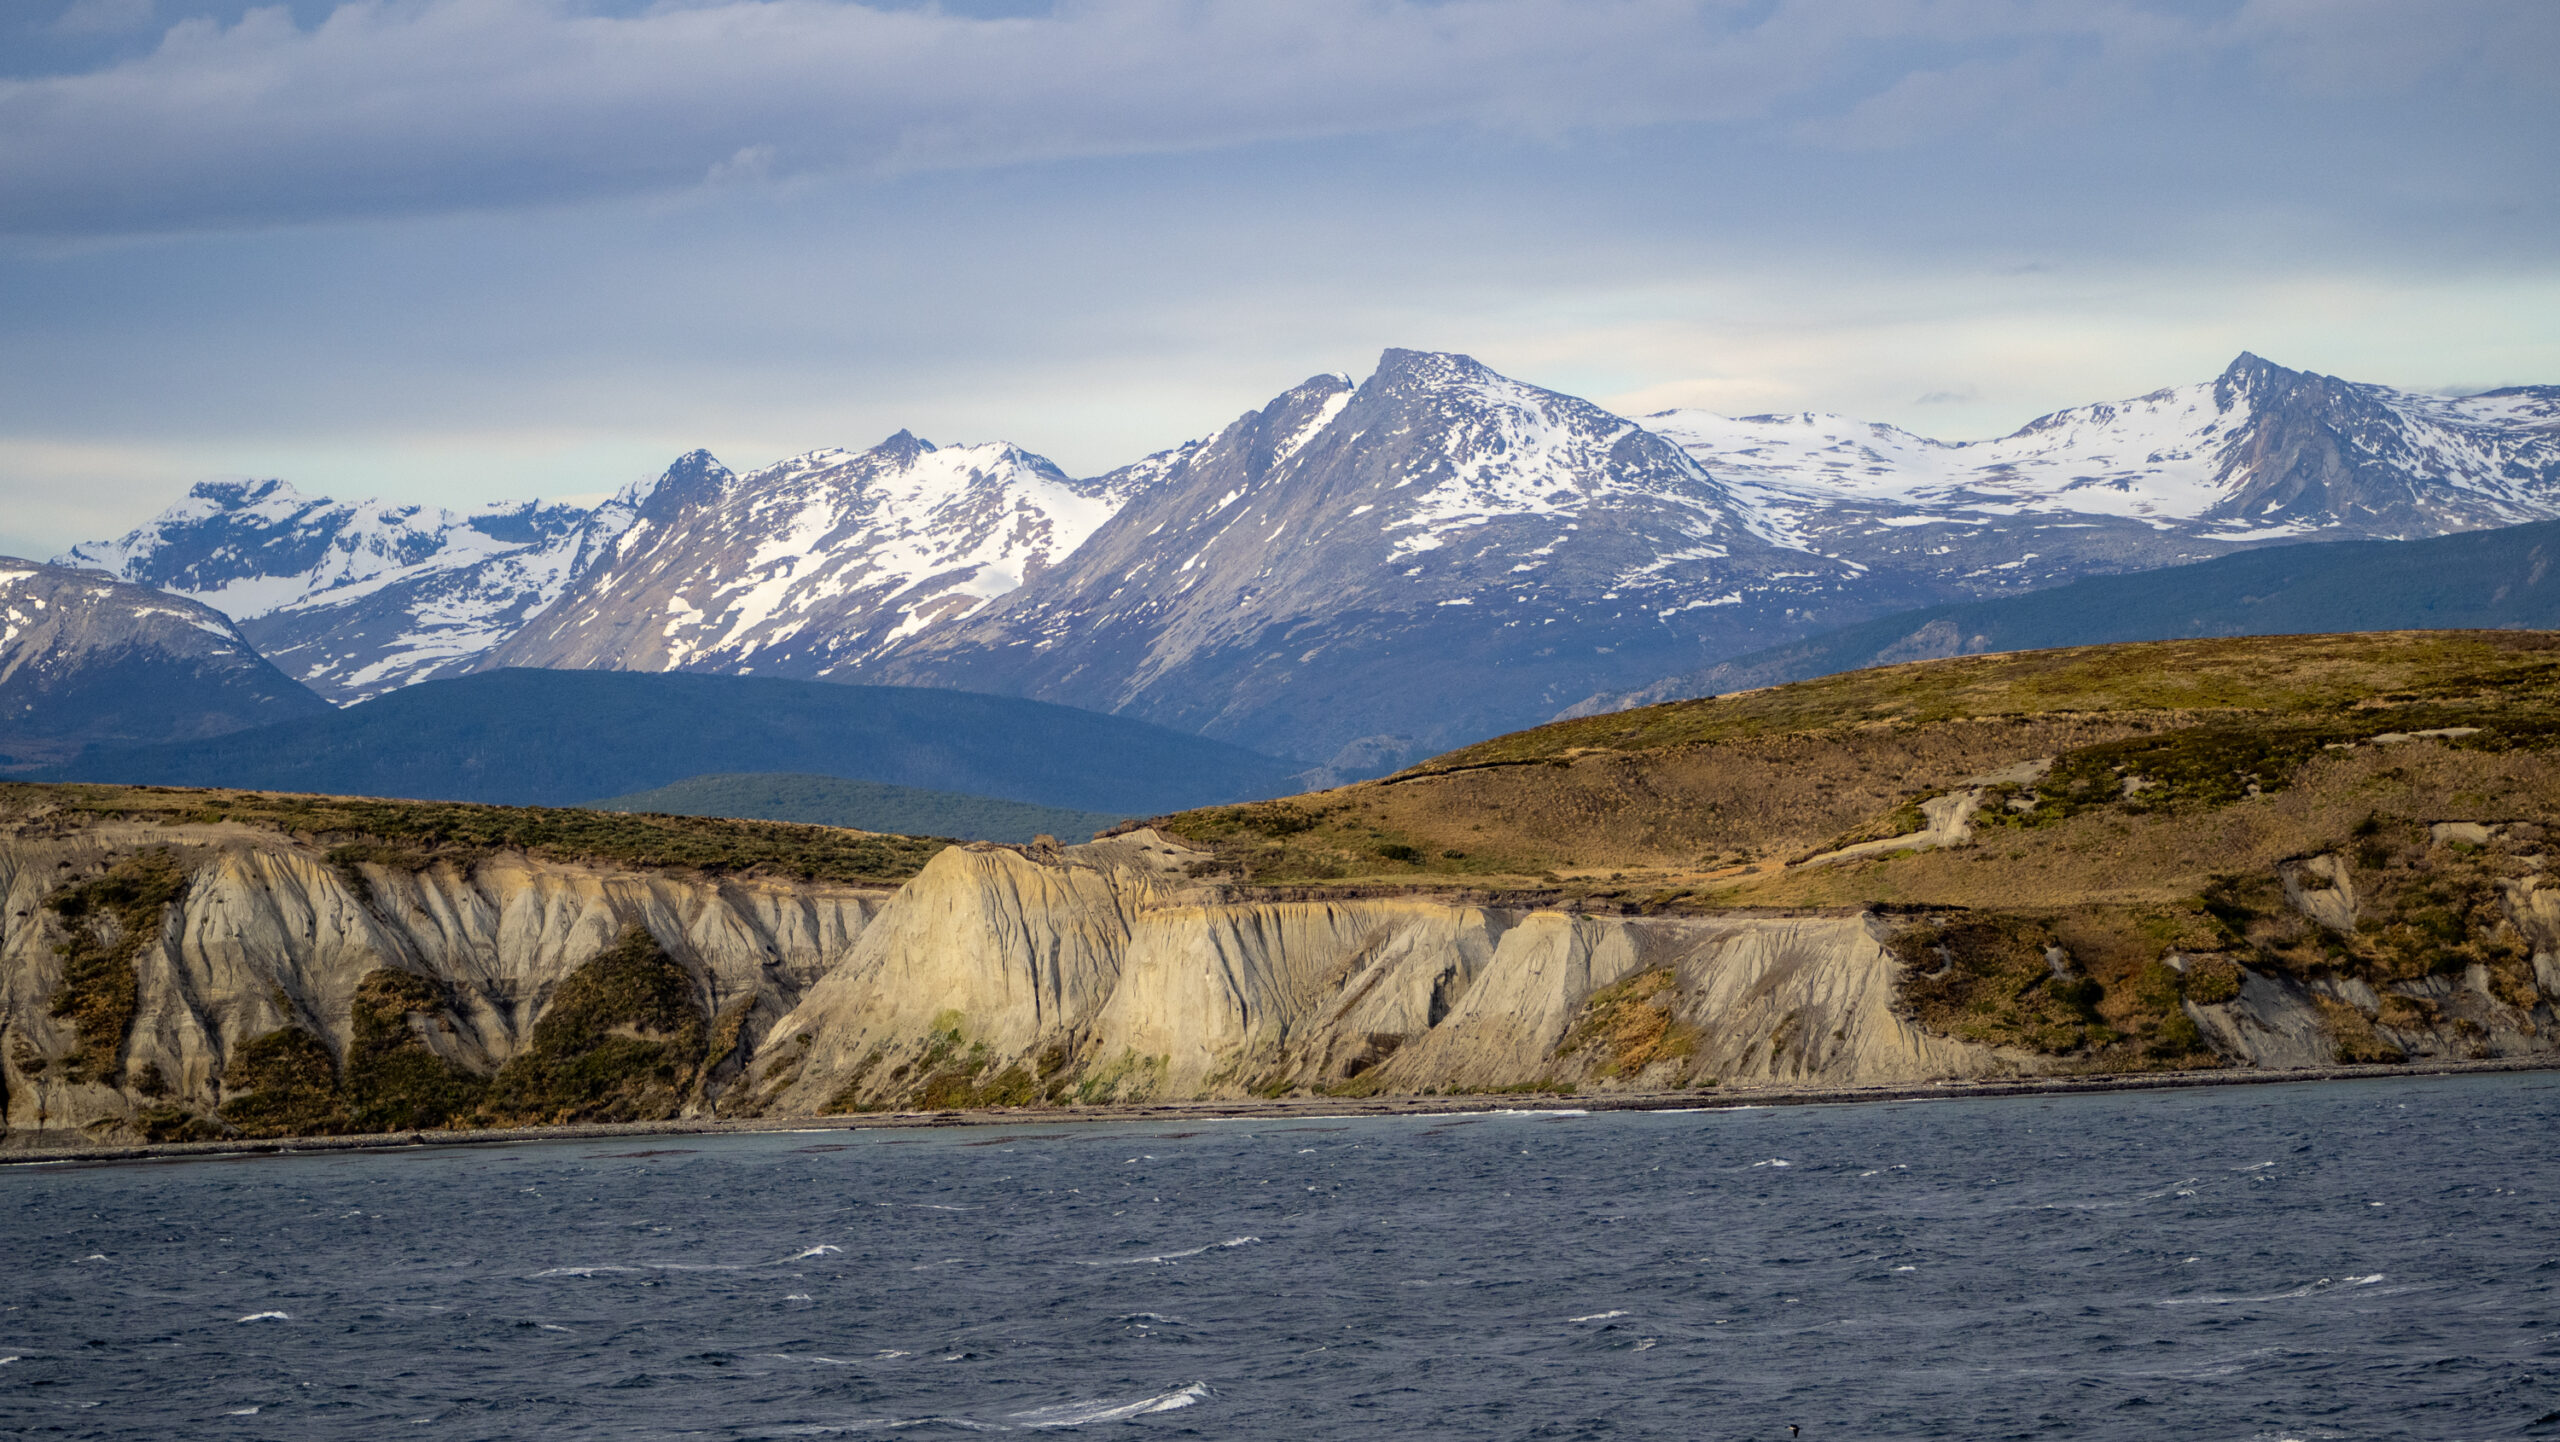 Beagle Channel heading south to Antarctica